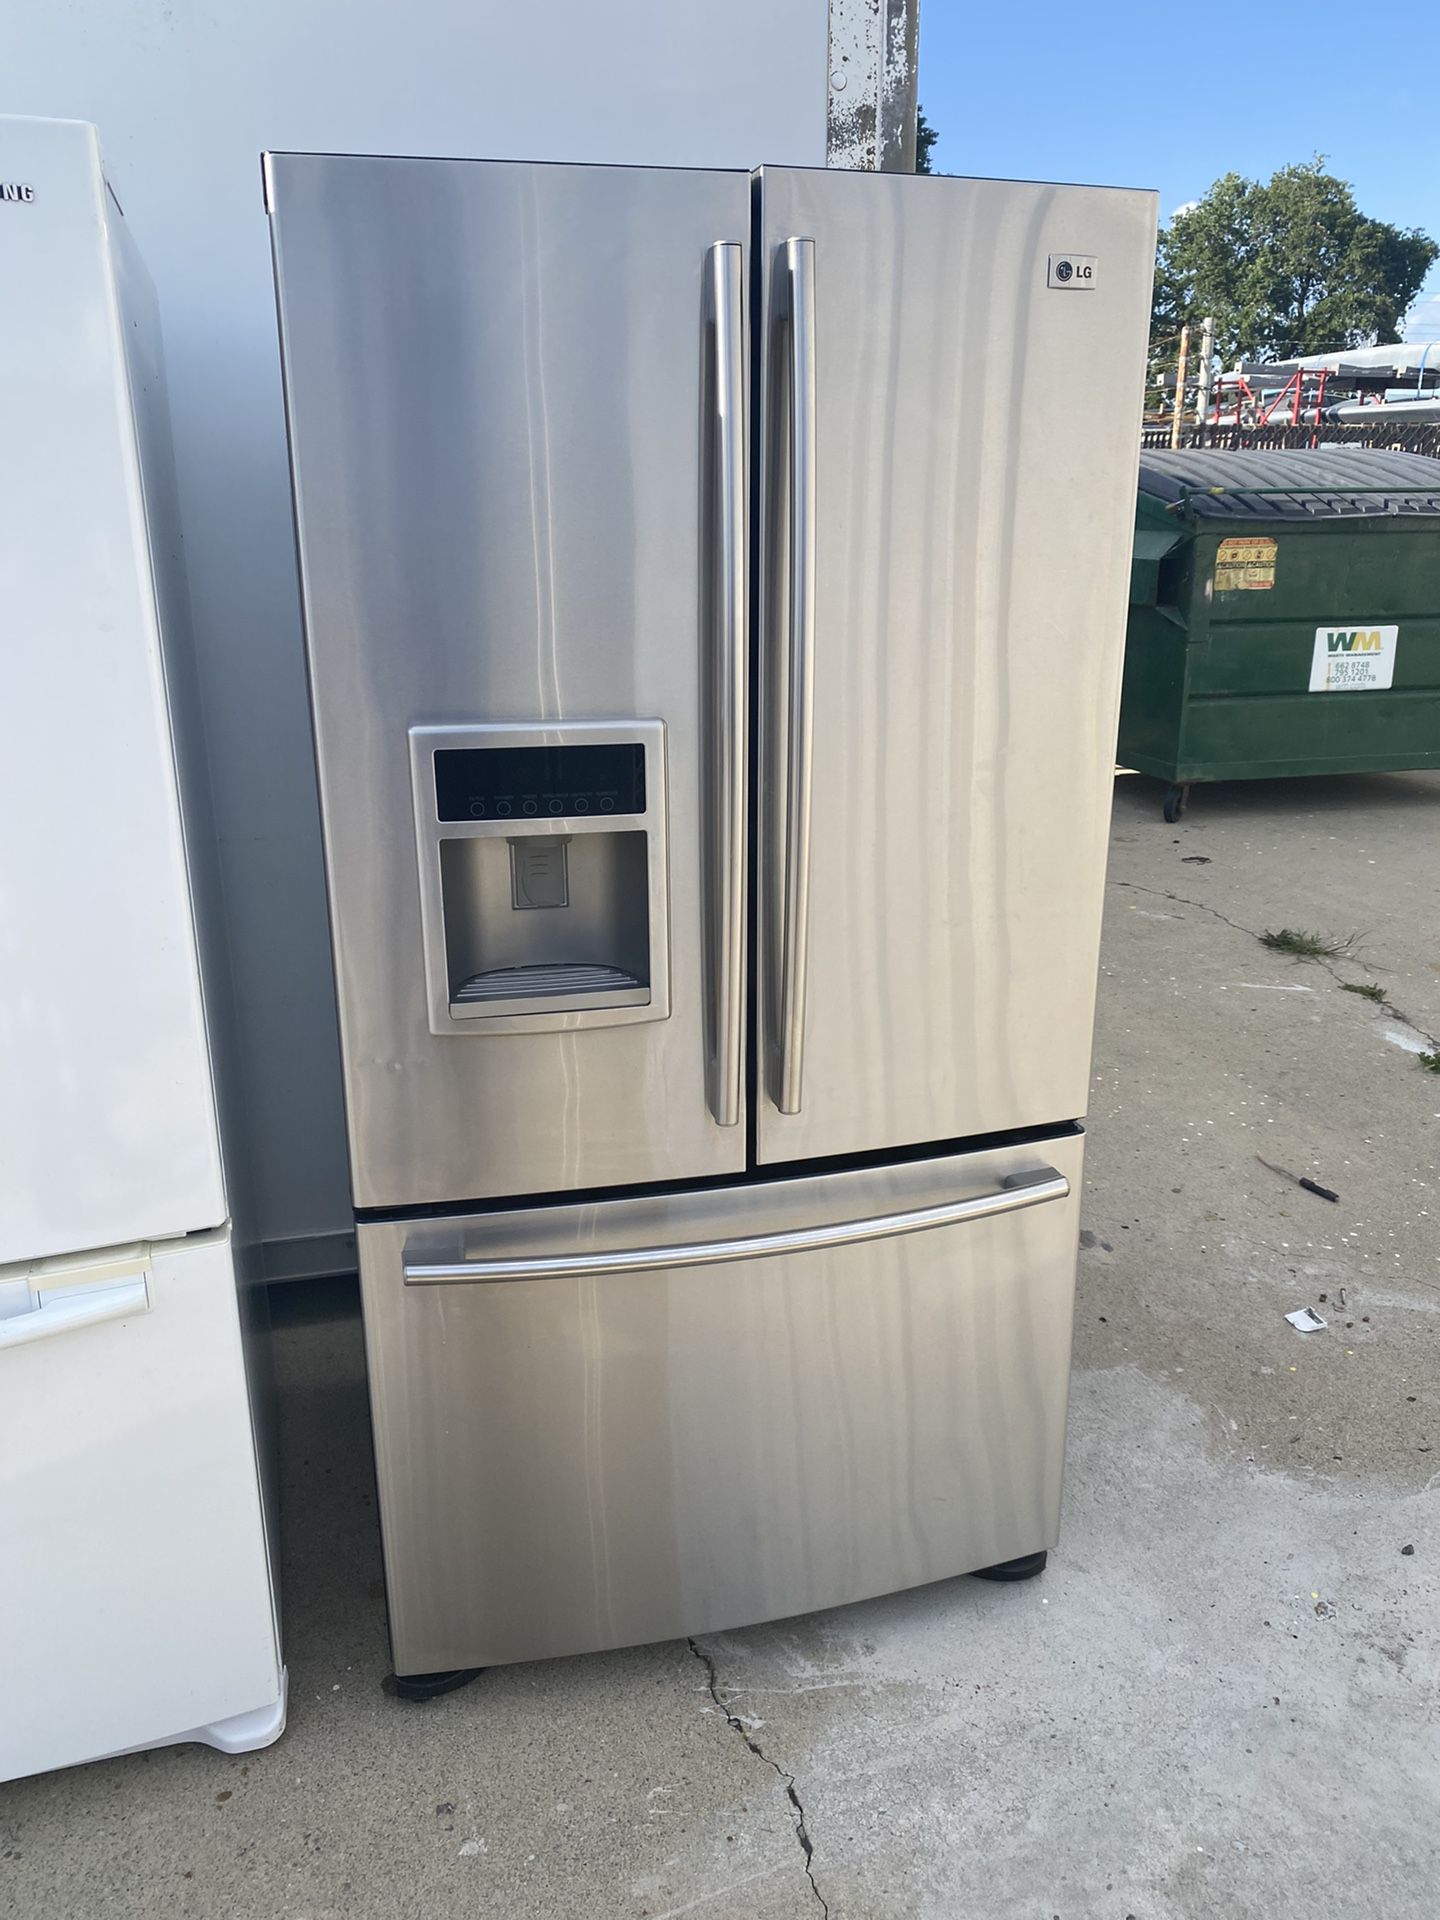 Stainless LG Garage Frenchdoor icemaker doesn’t work can deliver